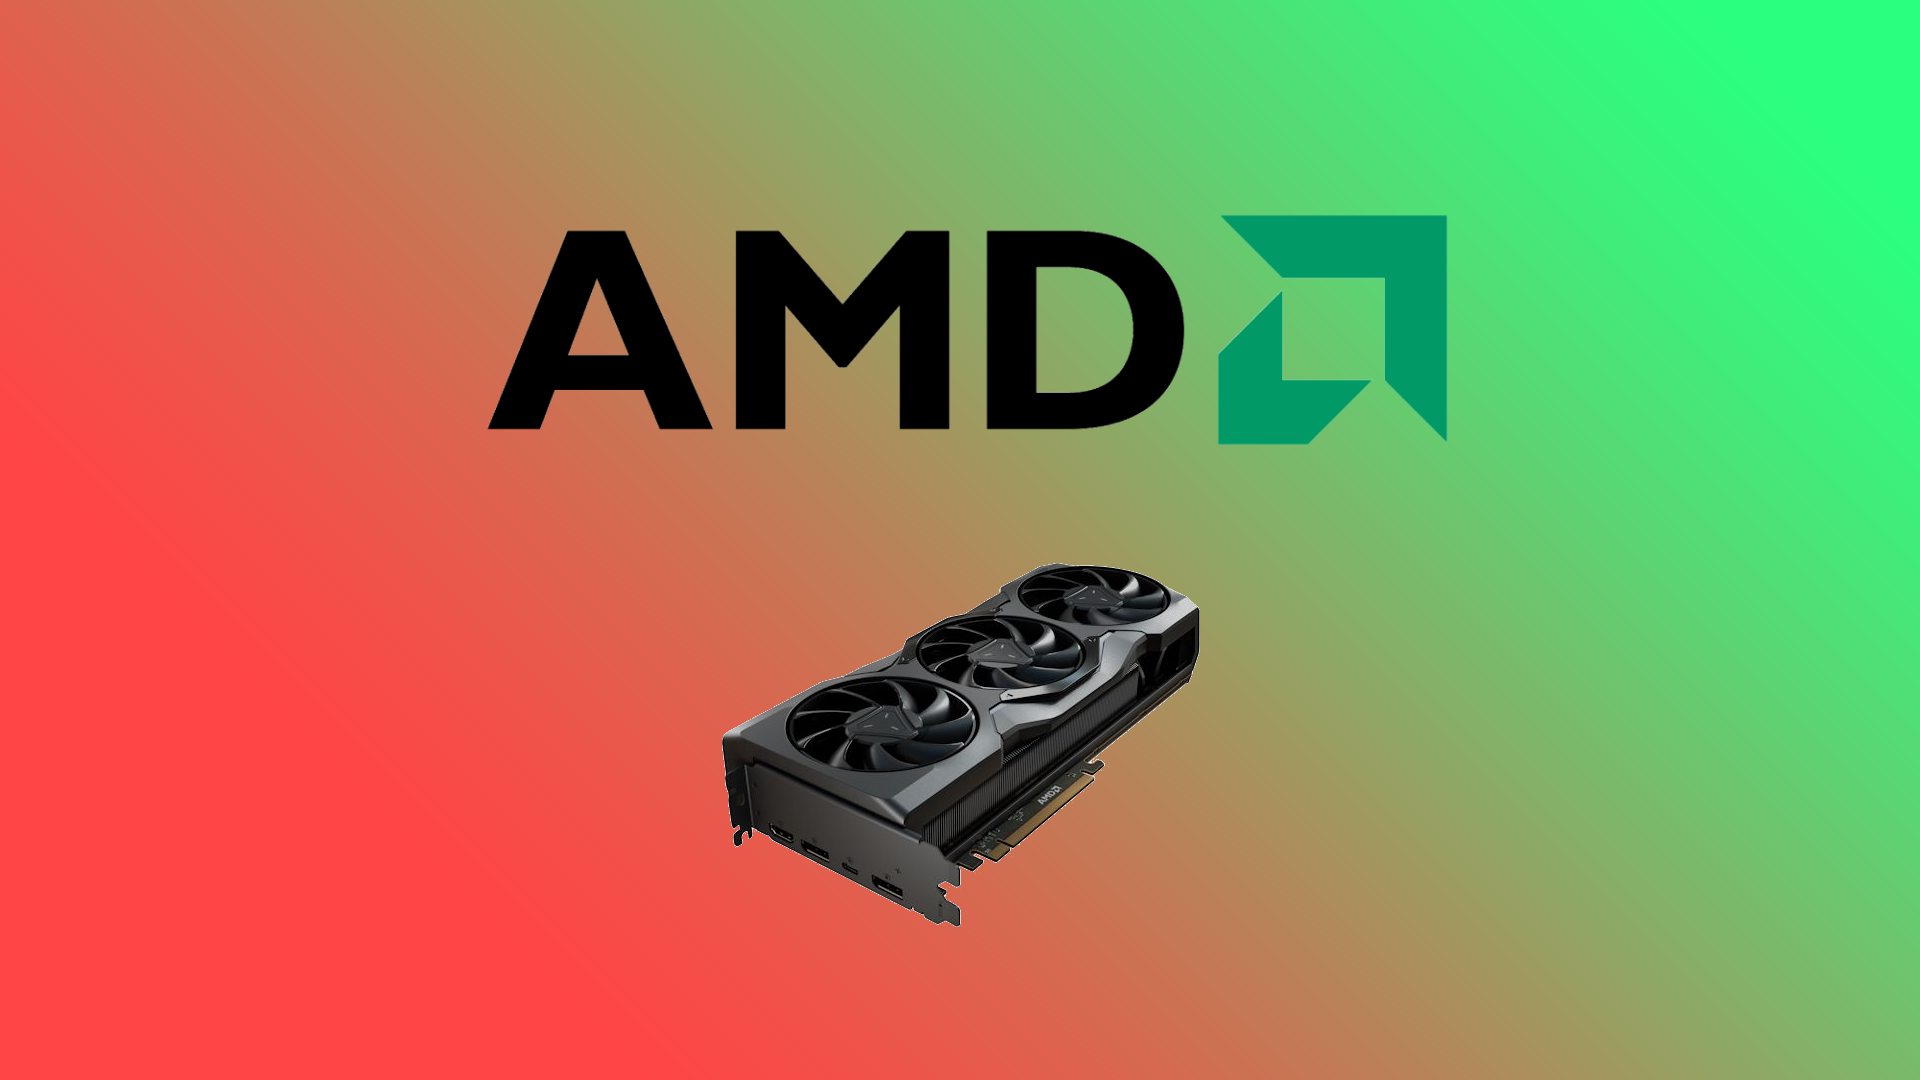 AMD claims that the Radeon RX 7900 is a better choice than the NVIDIA GeForce RTX 4080